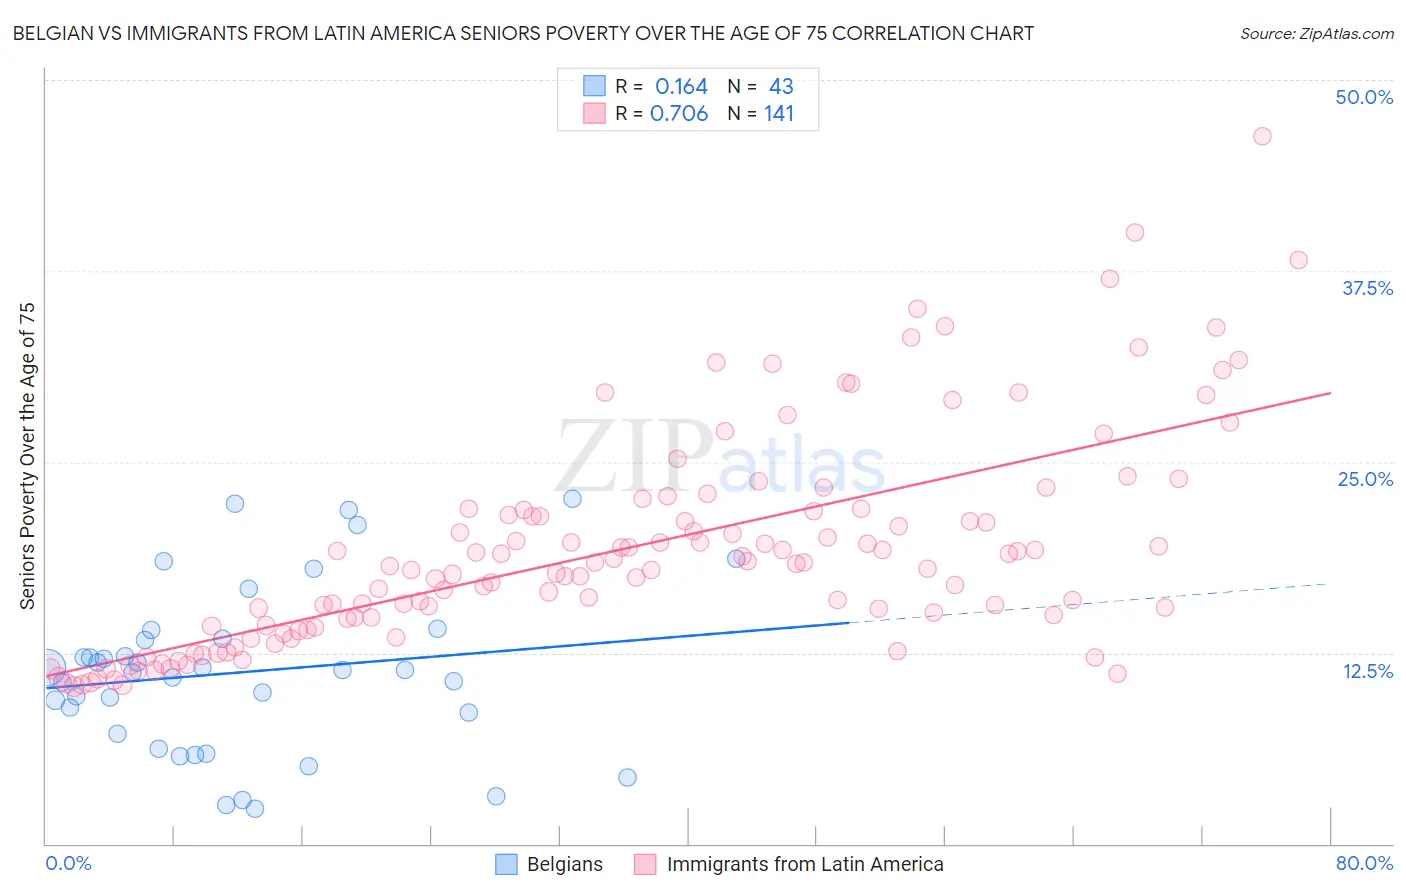 Belgian vs Immigrants from Latin America Seniors Poverty Over the Age of 75